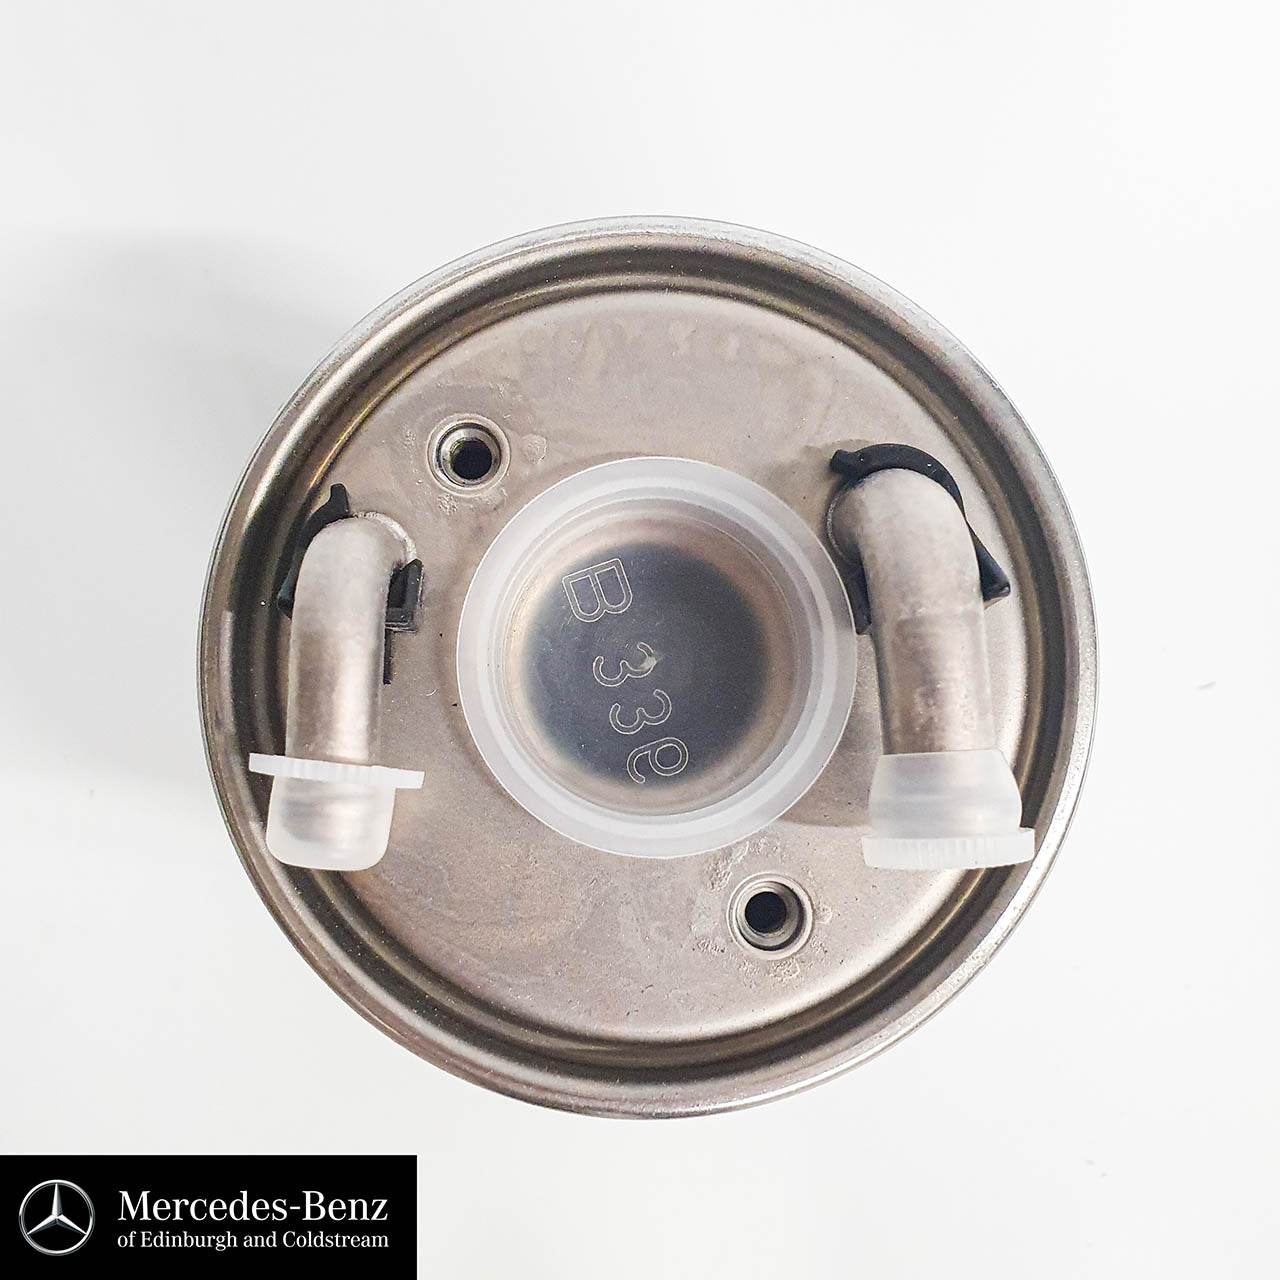 Genuine Mercedes-Benz fuel filter  A6420920301 without heating element